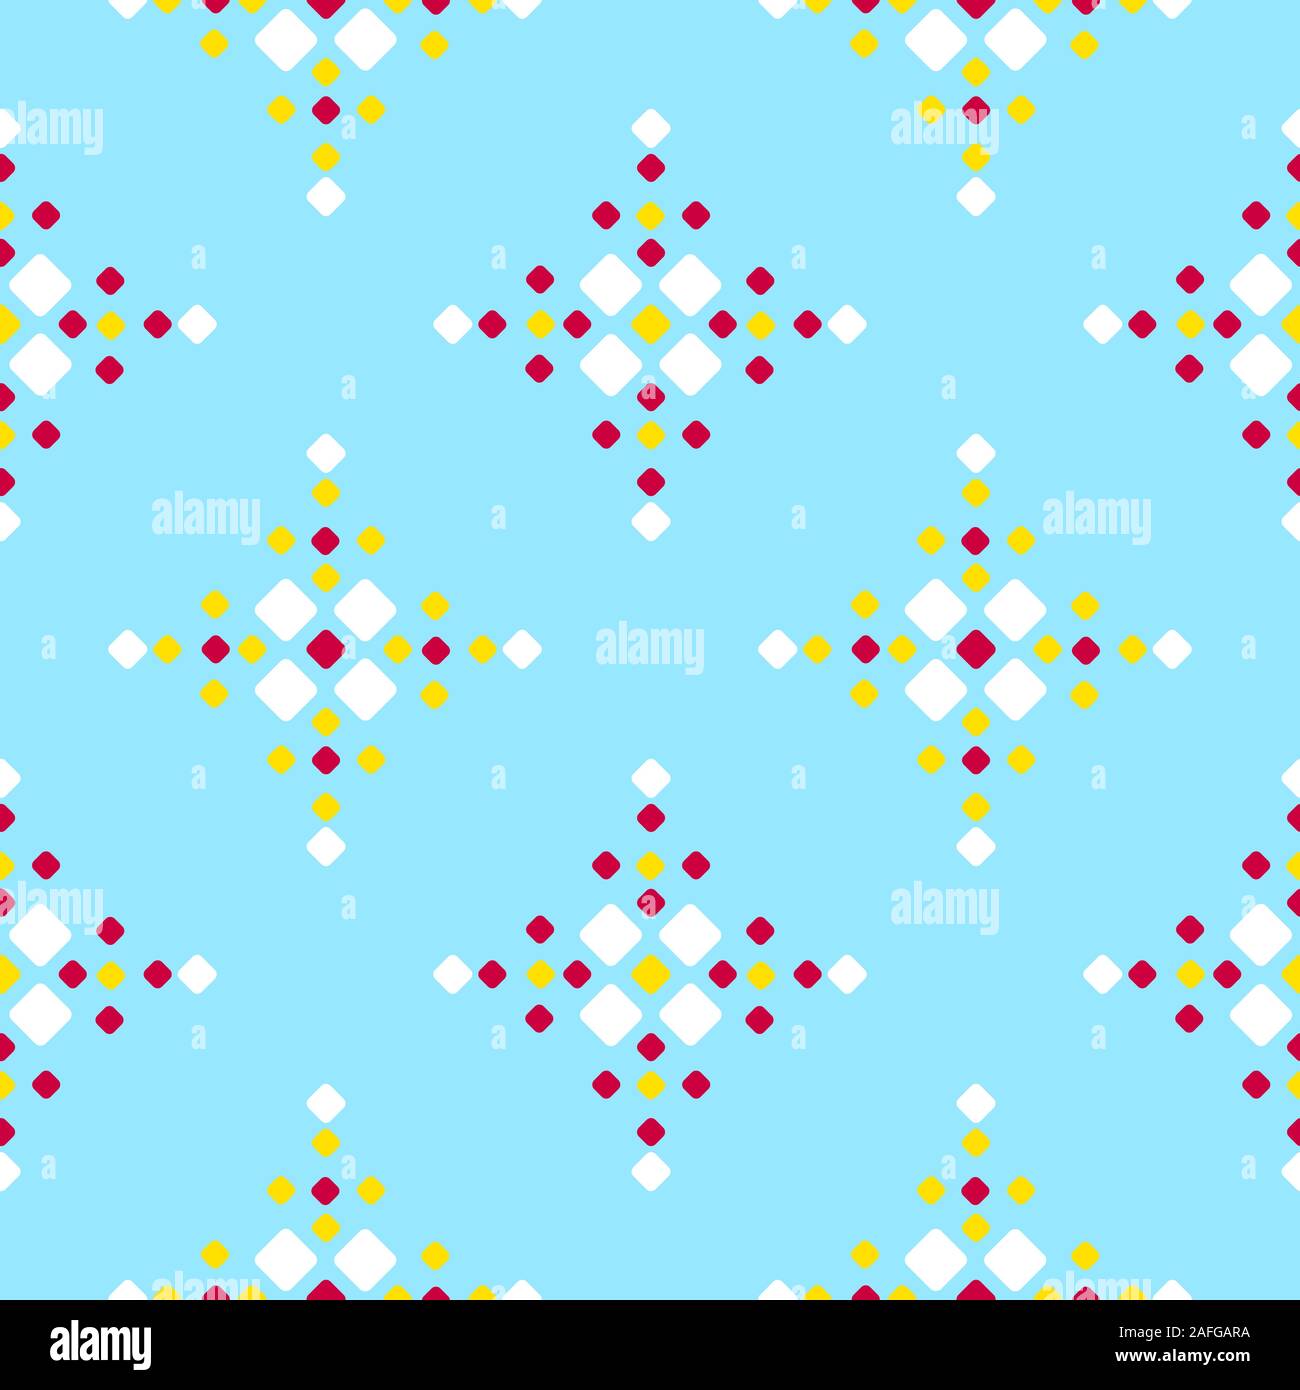 Fair Isle style blue red yellow white vector seamless geometric pattern with rhombus Stock Vector